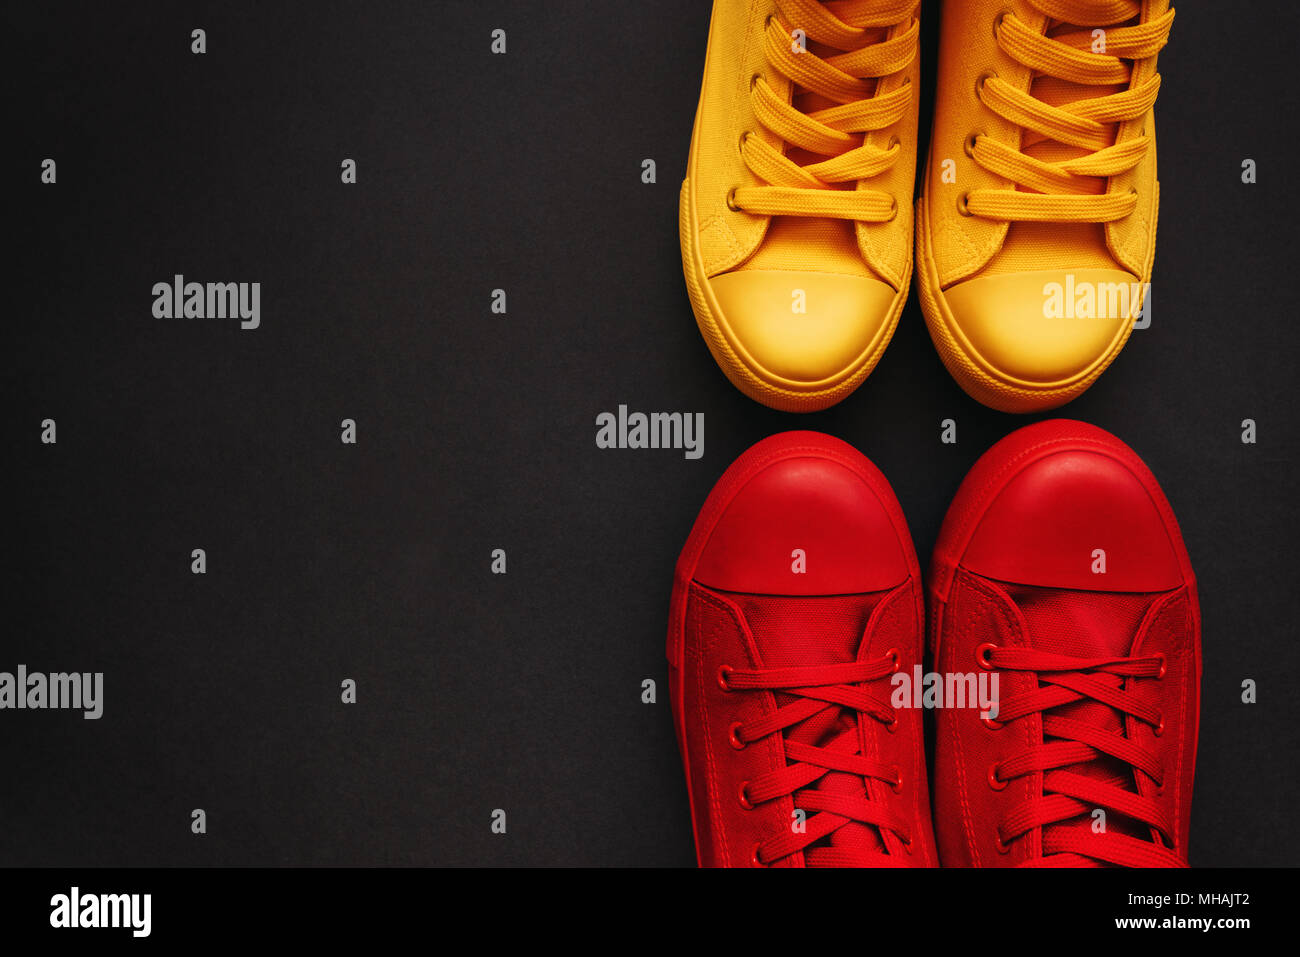 Young adult people on a love date, conceptual image. Top view of two pair of casual sneakers, yellow and red, from above Stock Photo